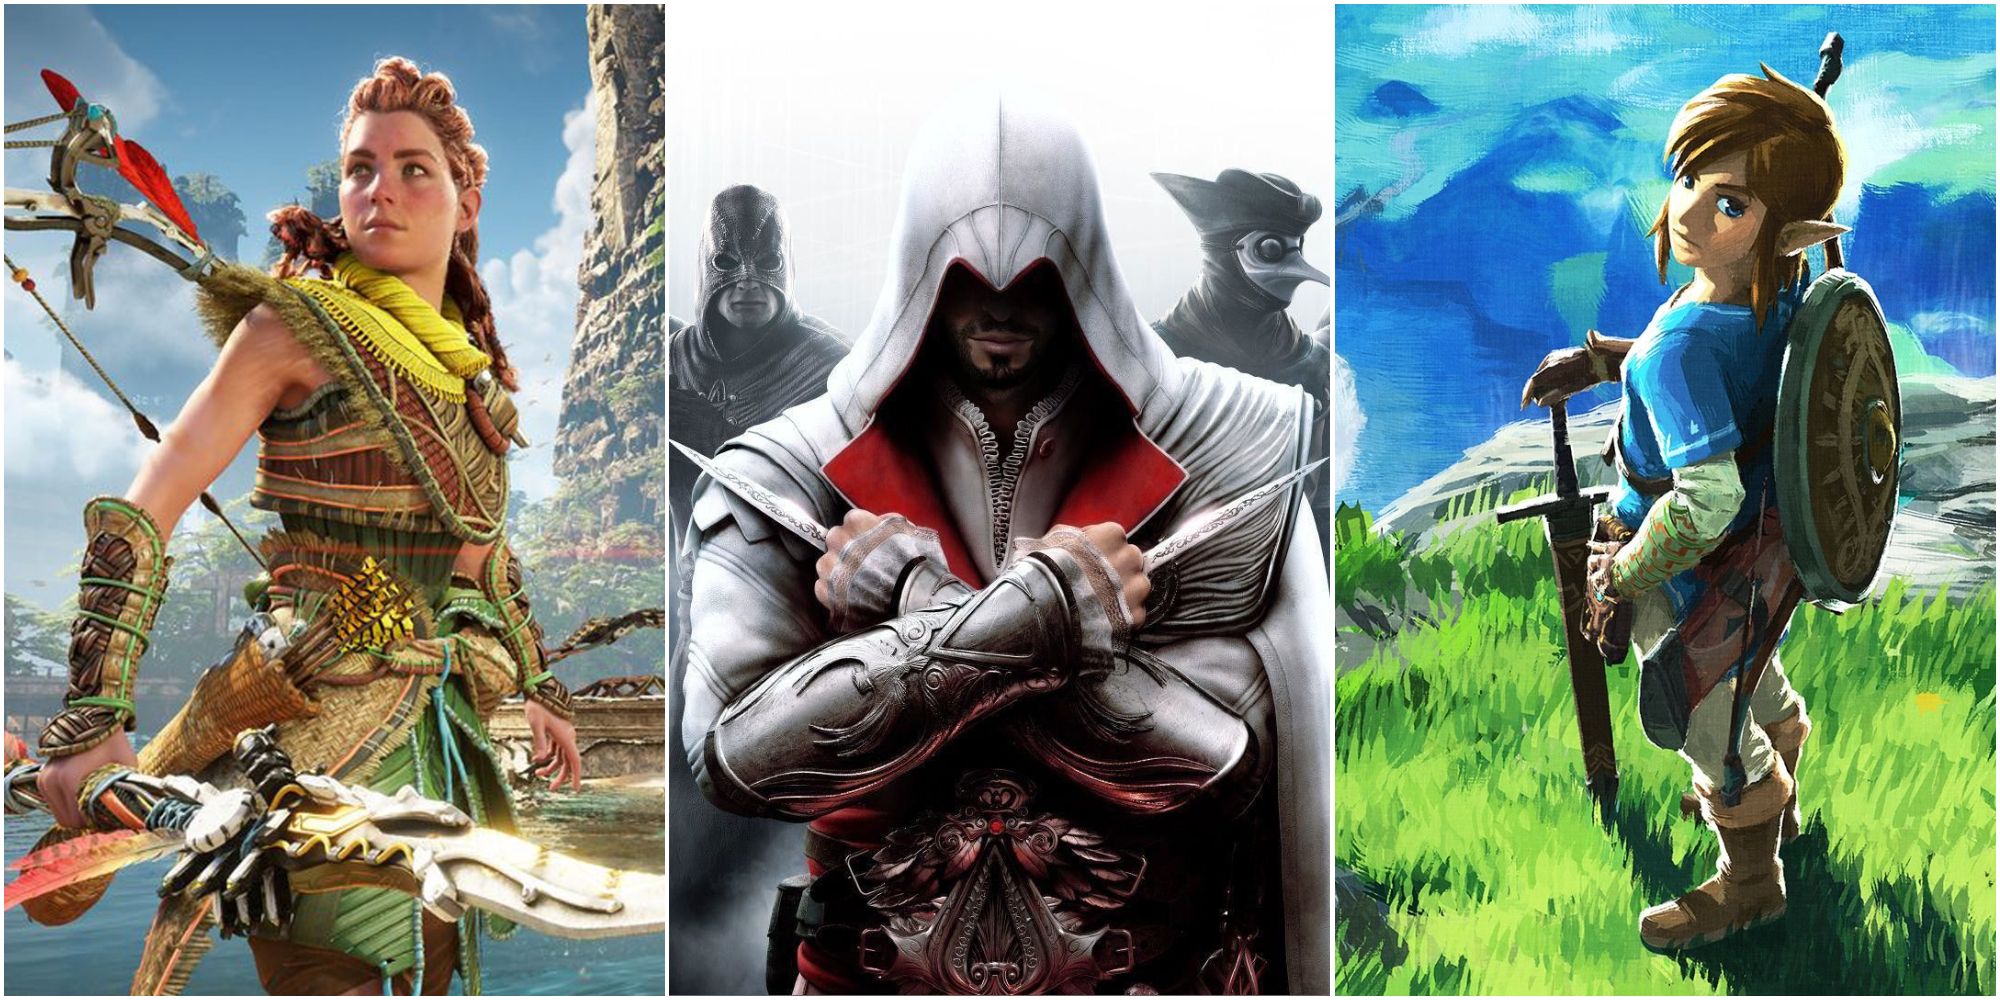 Aloy from Horizon Forbidden West, Ezio from Assassin's Creed, Link from Breath of the Wild